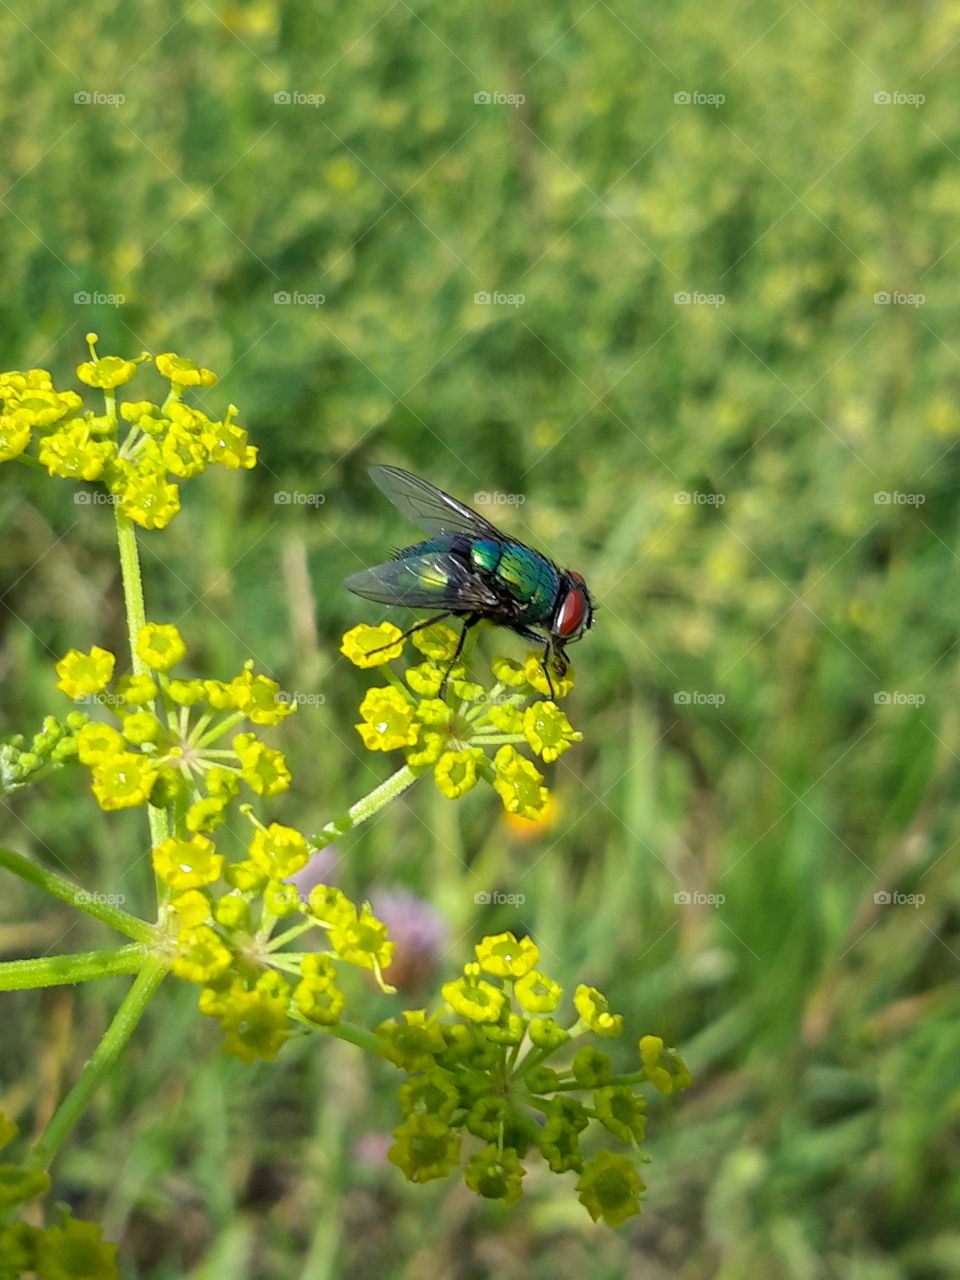 Green fly on a flower